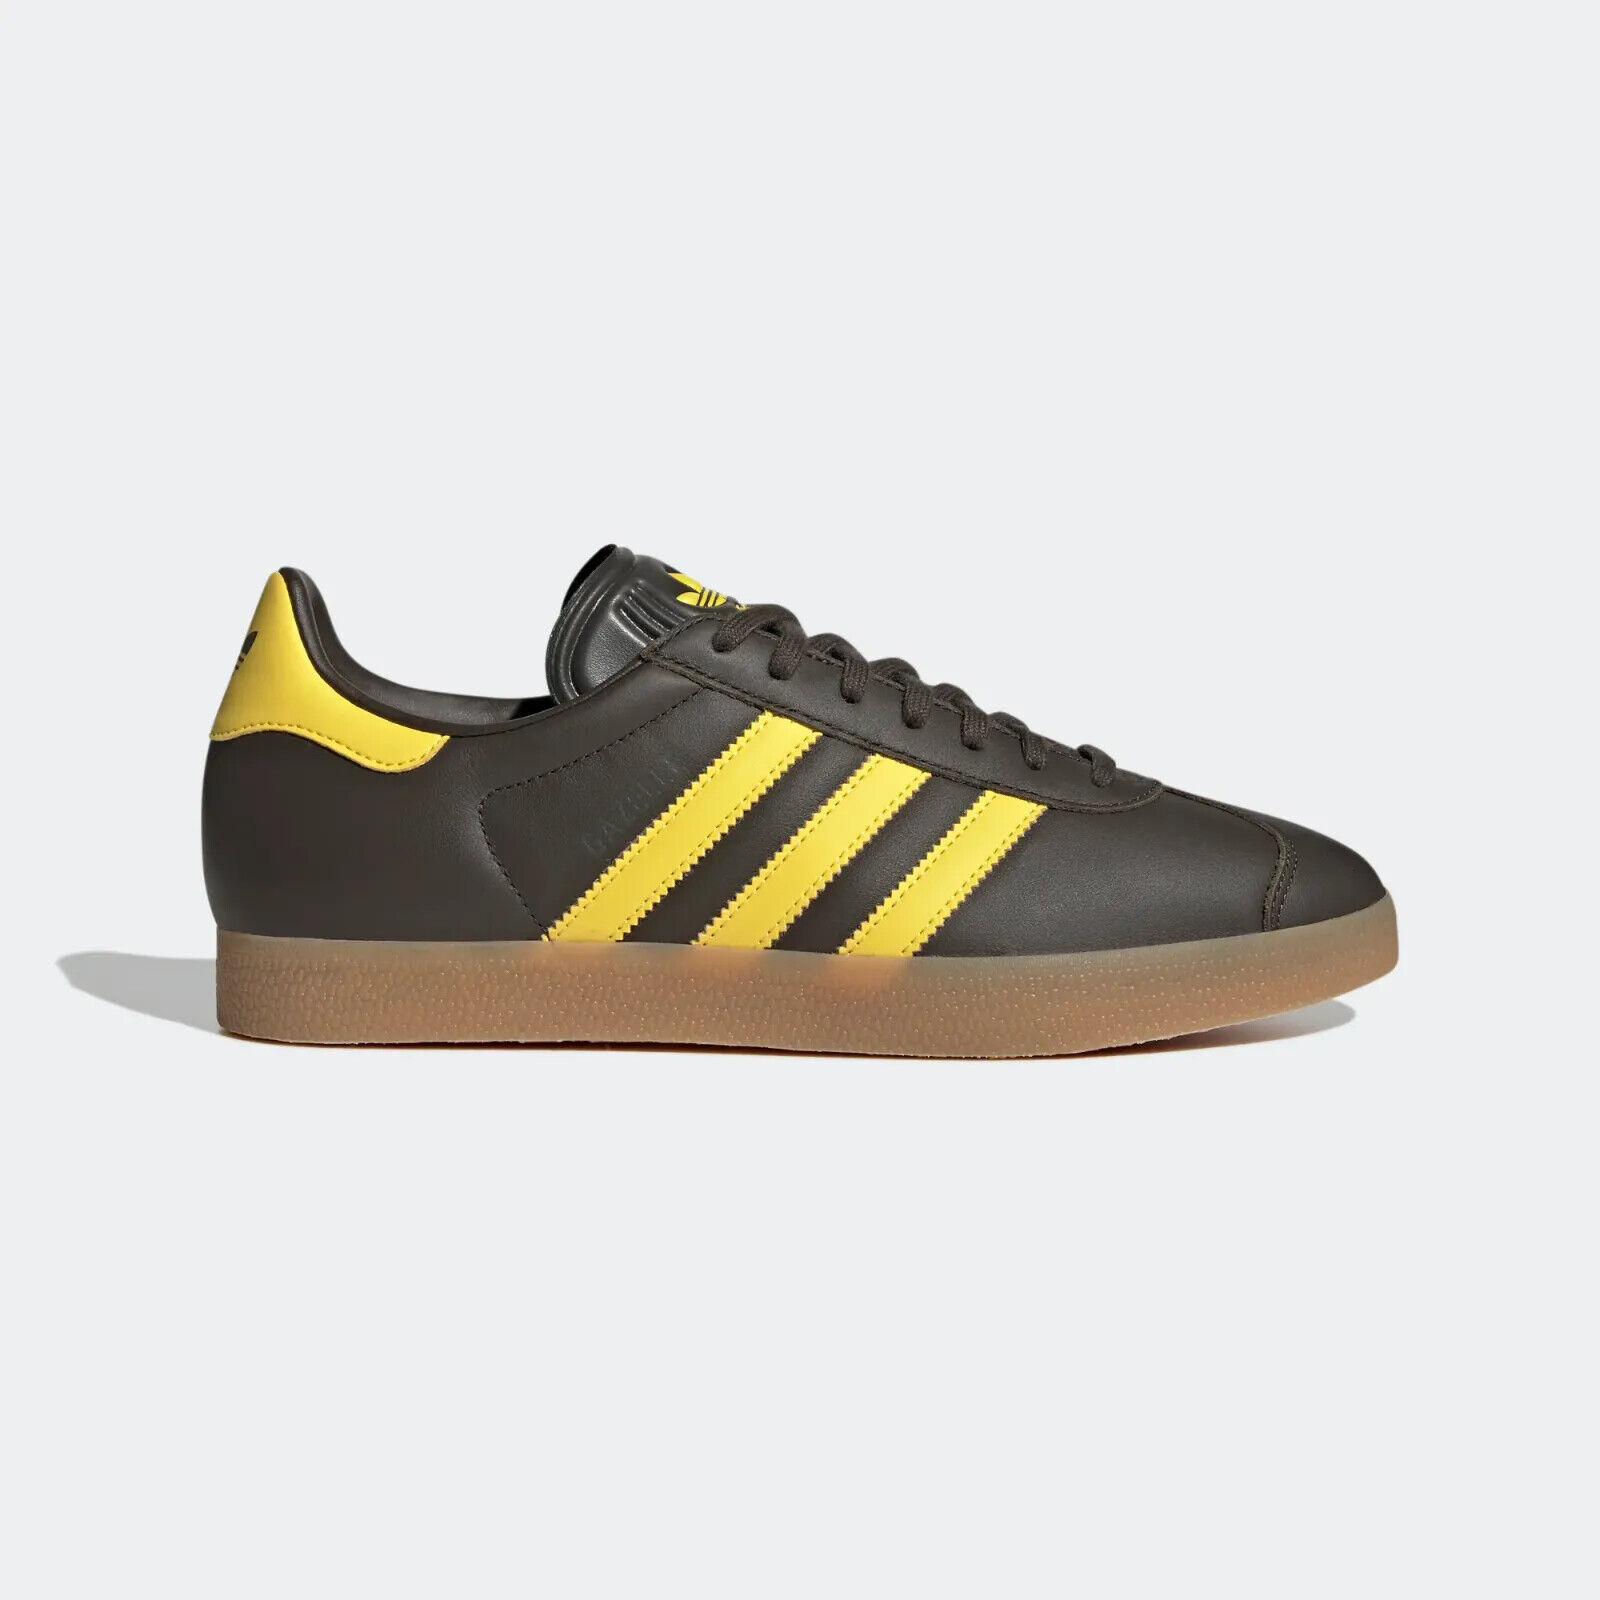 adidas Originals Gazelle Trainers in Olive and Yellow Men's Shoes